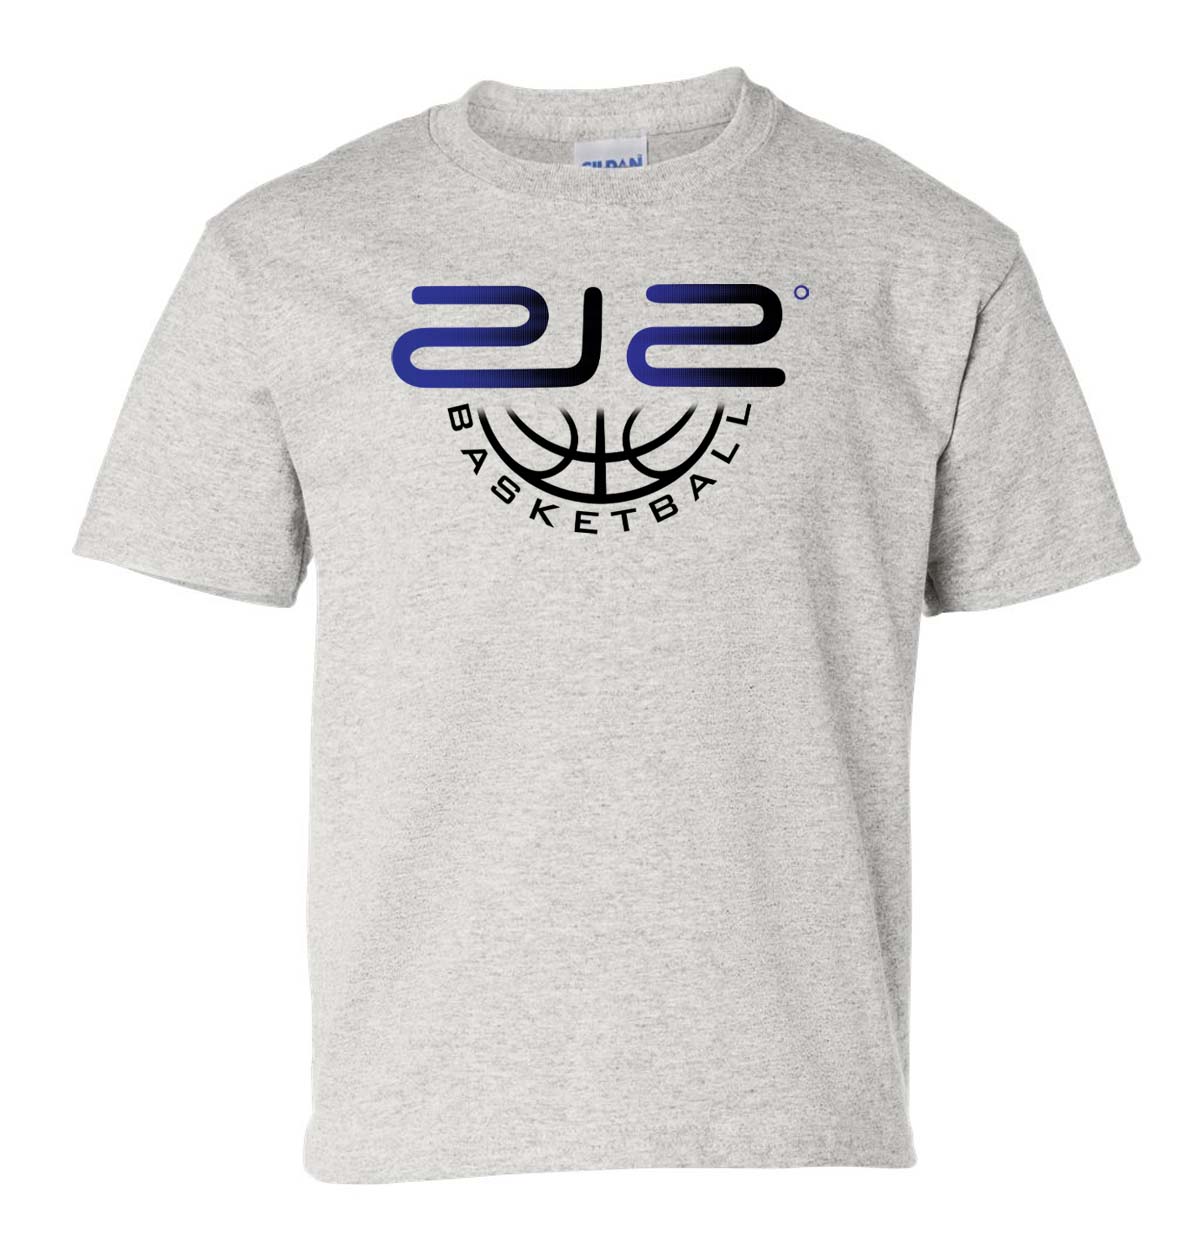 Youth 212 T-shirt